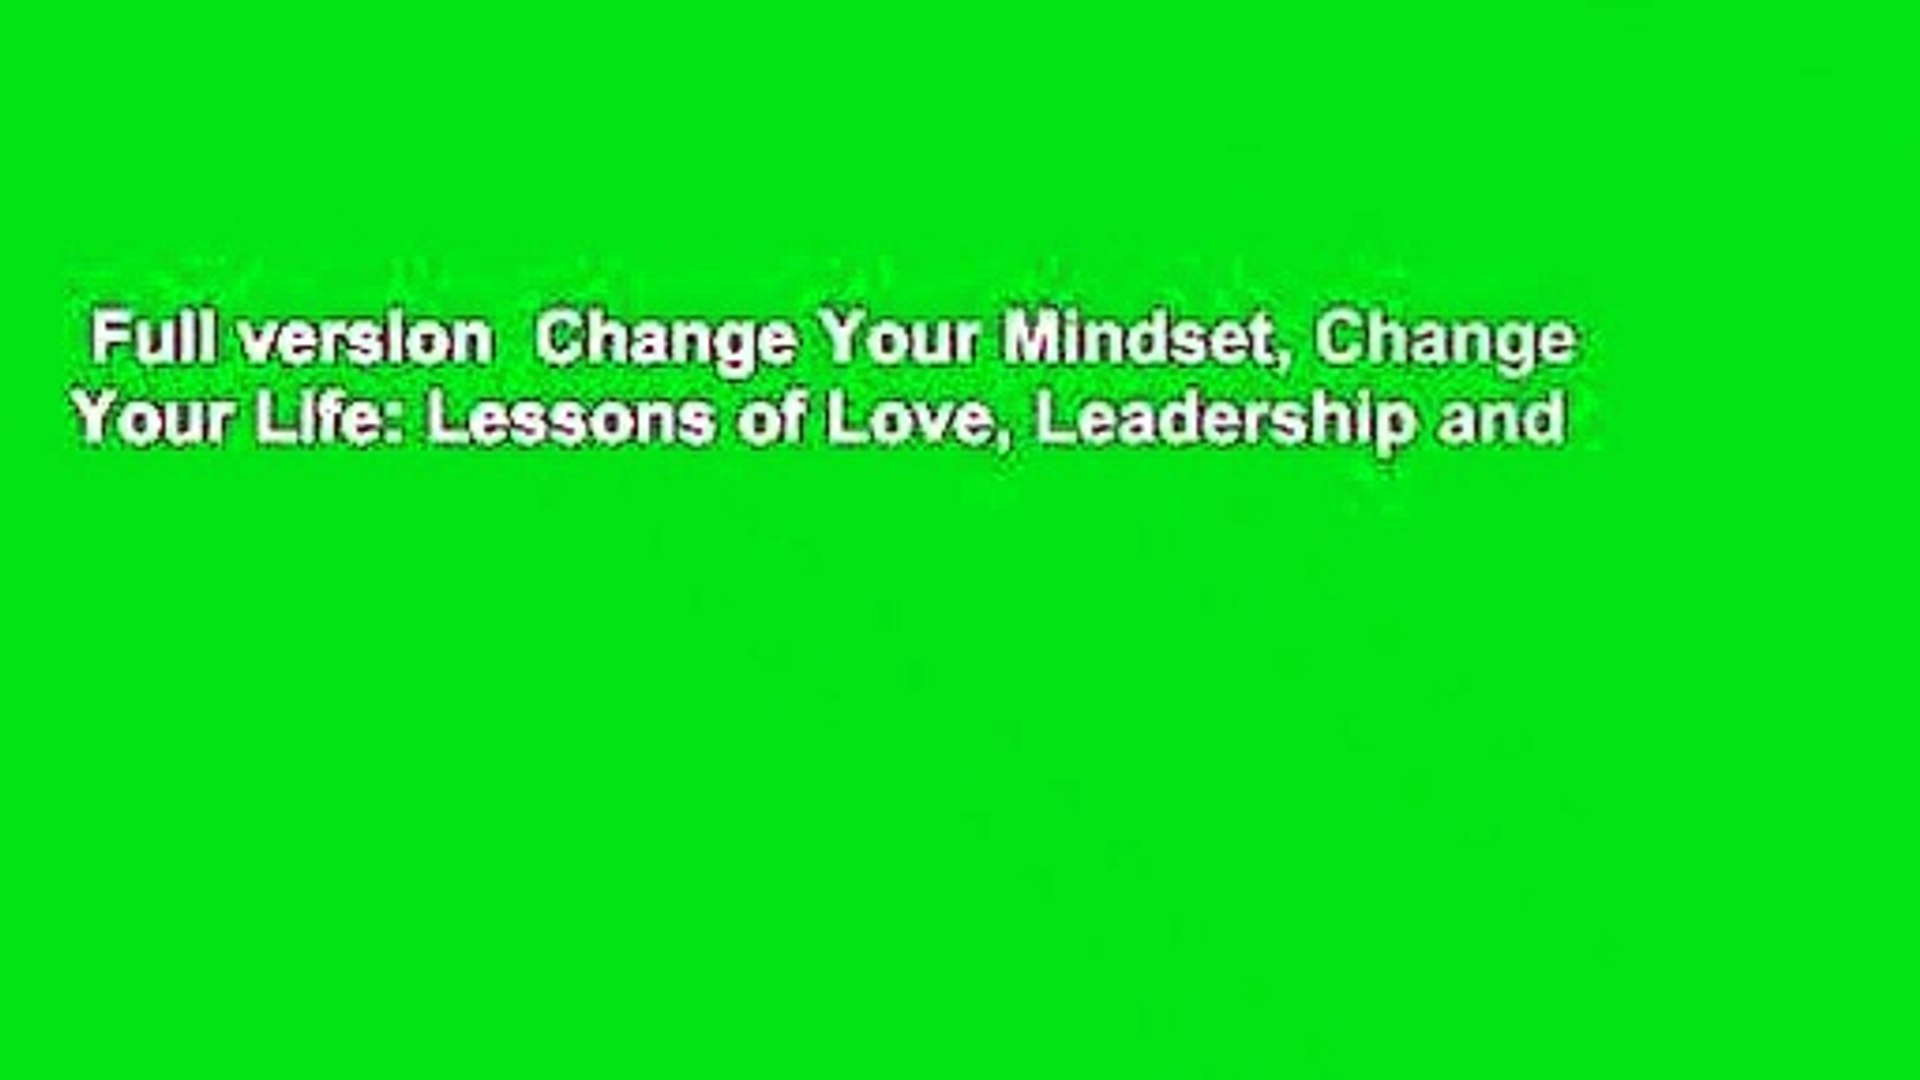 Full version  Change Your Mindset, Change Your Life: Lessons of Love, Leadership and